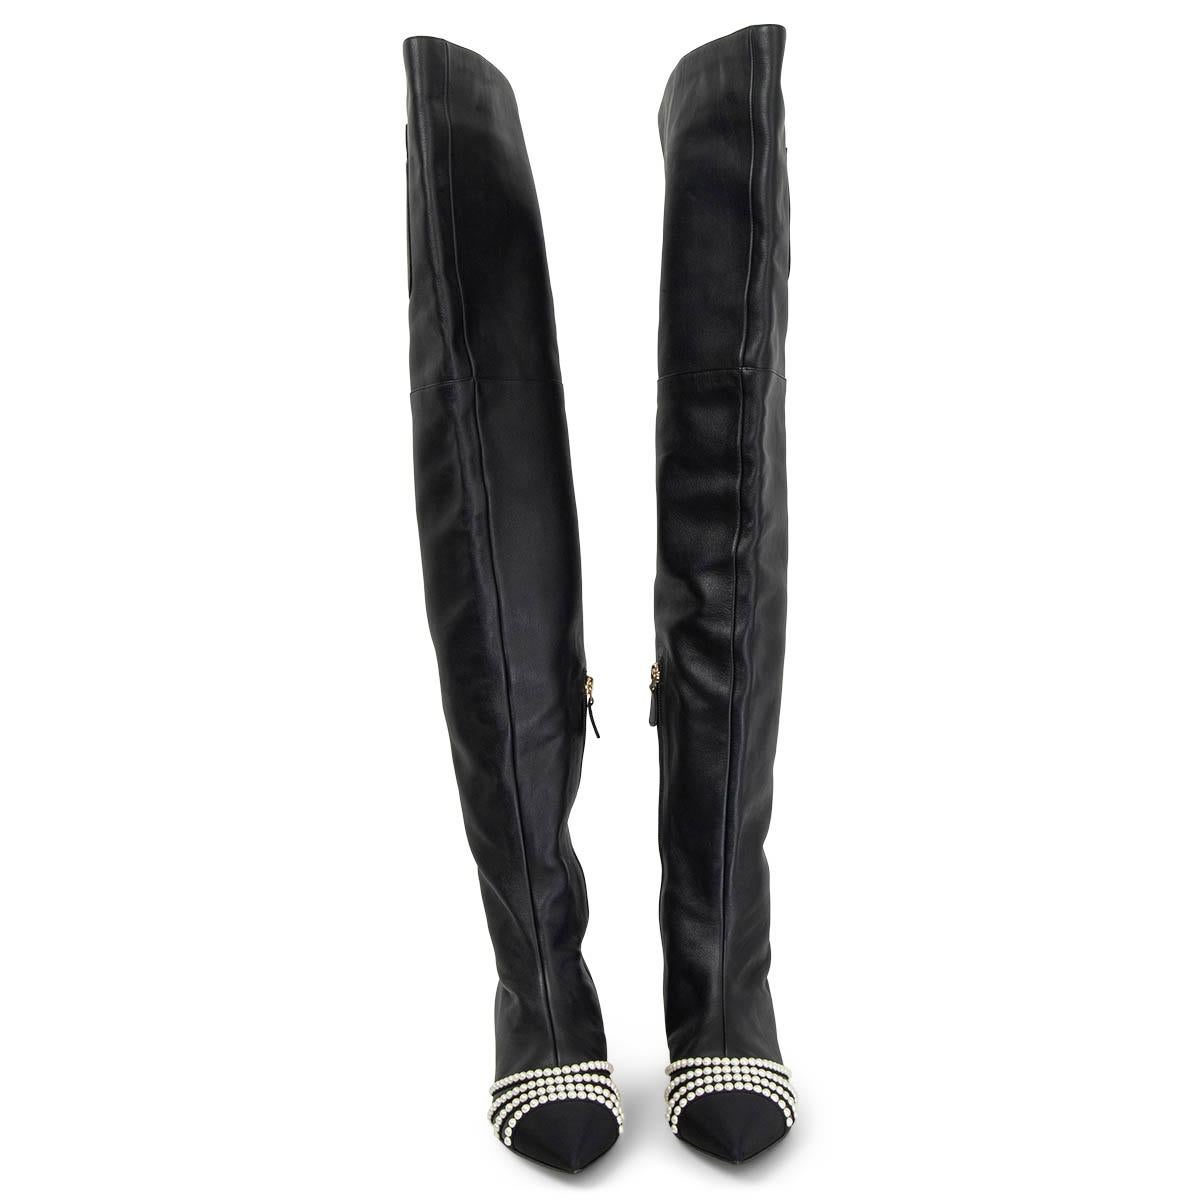 100% authentic Chanel 2016 Rome Over-Knee Boots in black smooth leather embellished with faux pearls, a grosgrain tip and a patent leather logo embellished block-heel. They come with a thigh pocket with a pearl push-button. Have been worn and are in